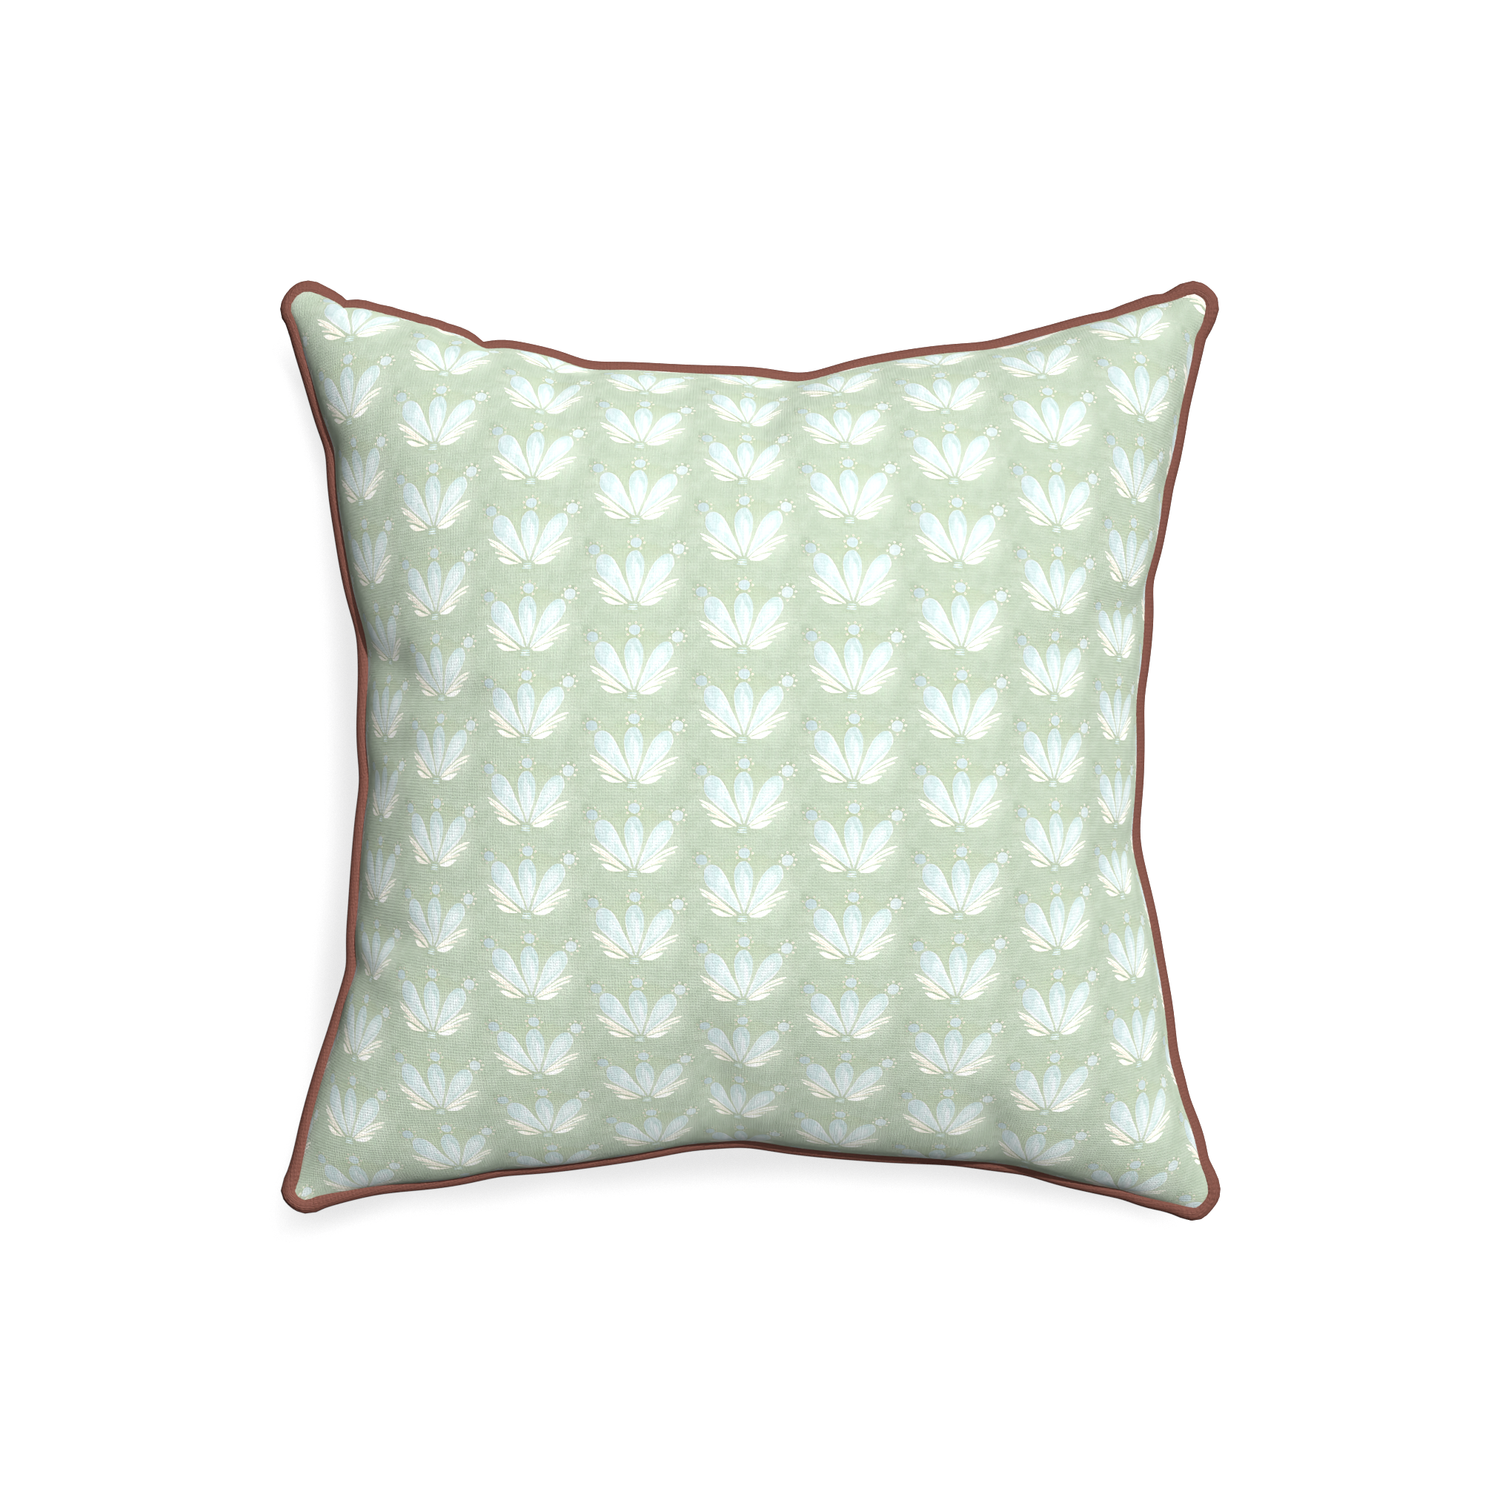 20-square serena sea salt custom blue & green floral drop repeatpillow with w piping on white background